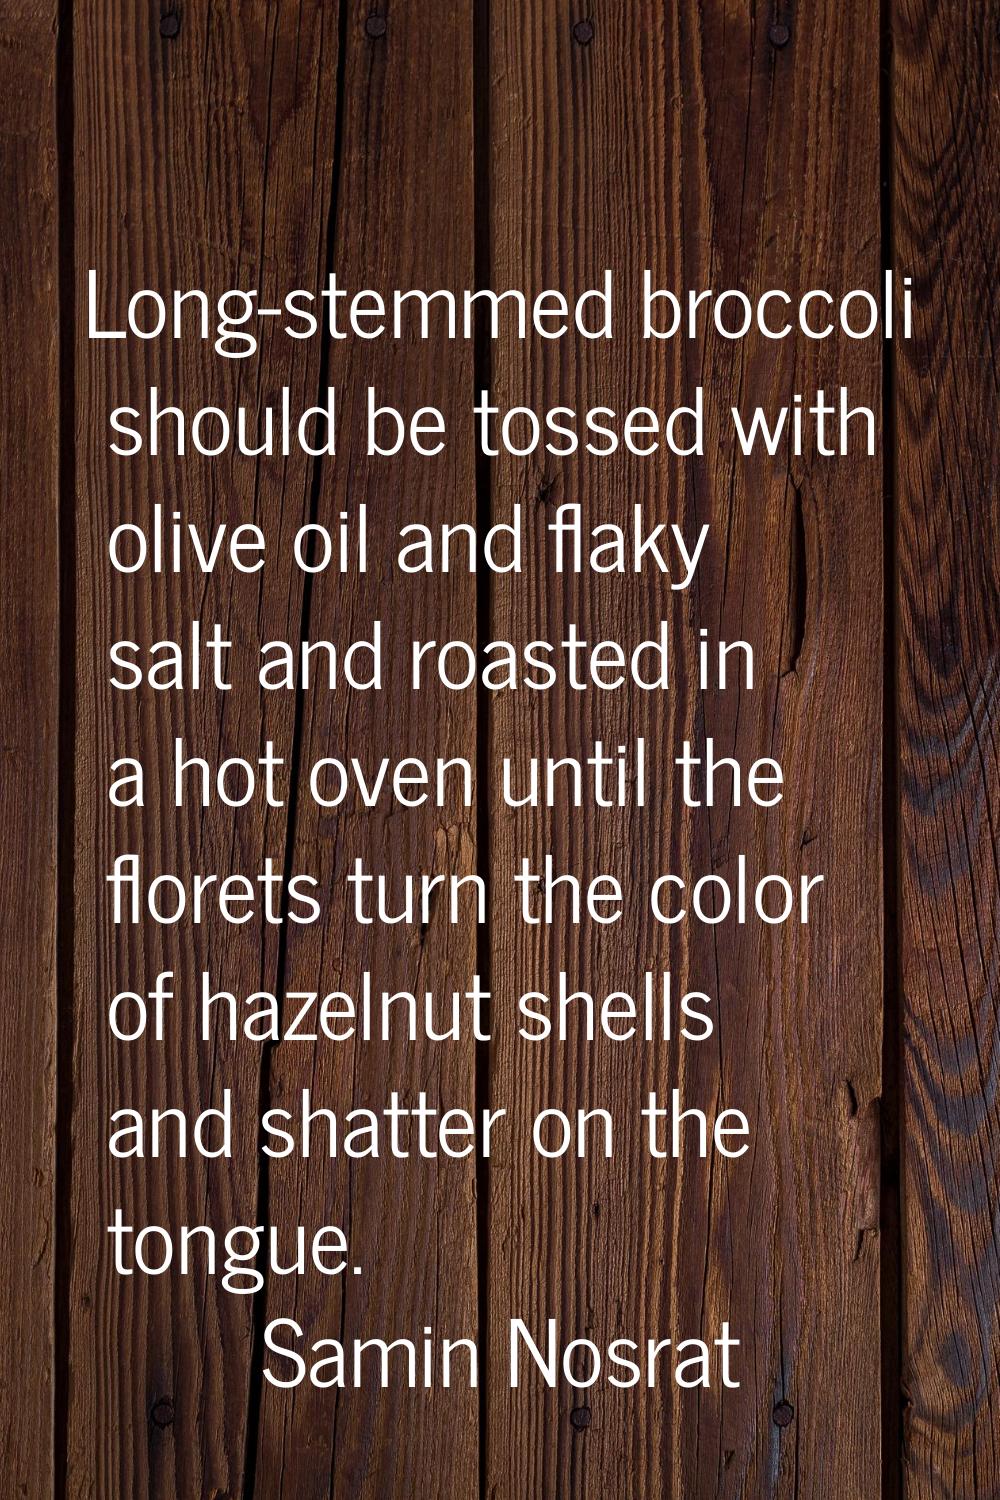 Long-stemmed broccoli should be tossed with olive oil and flaky salt and roasted in a hot oven unti